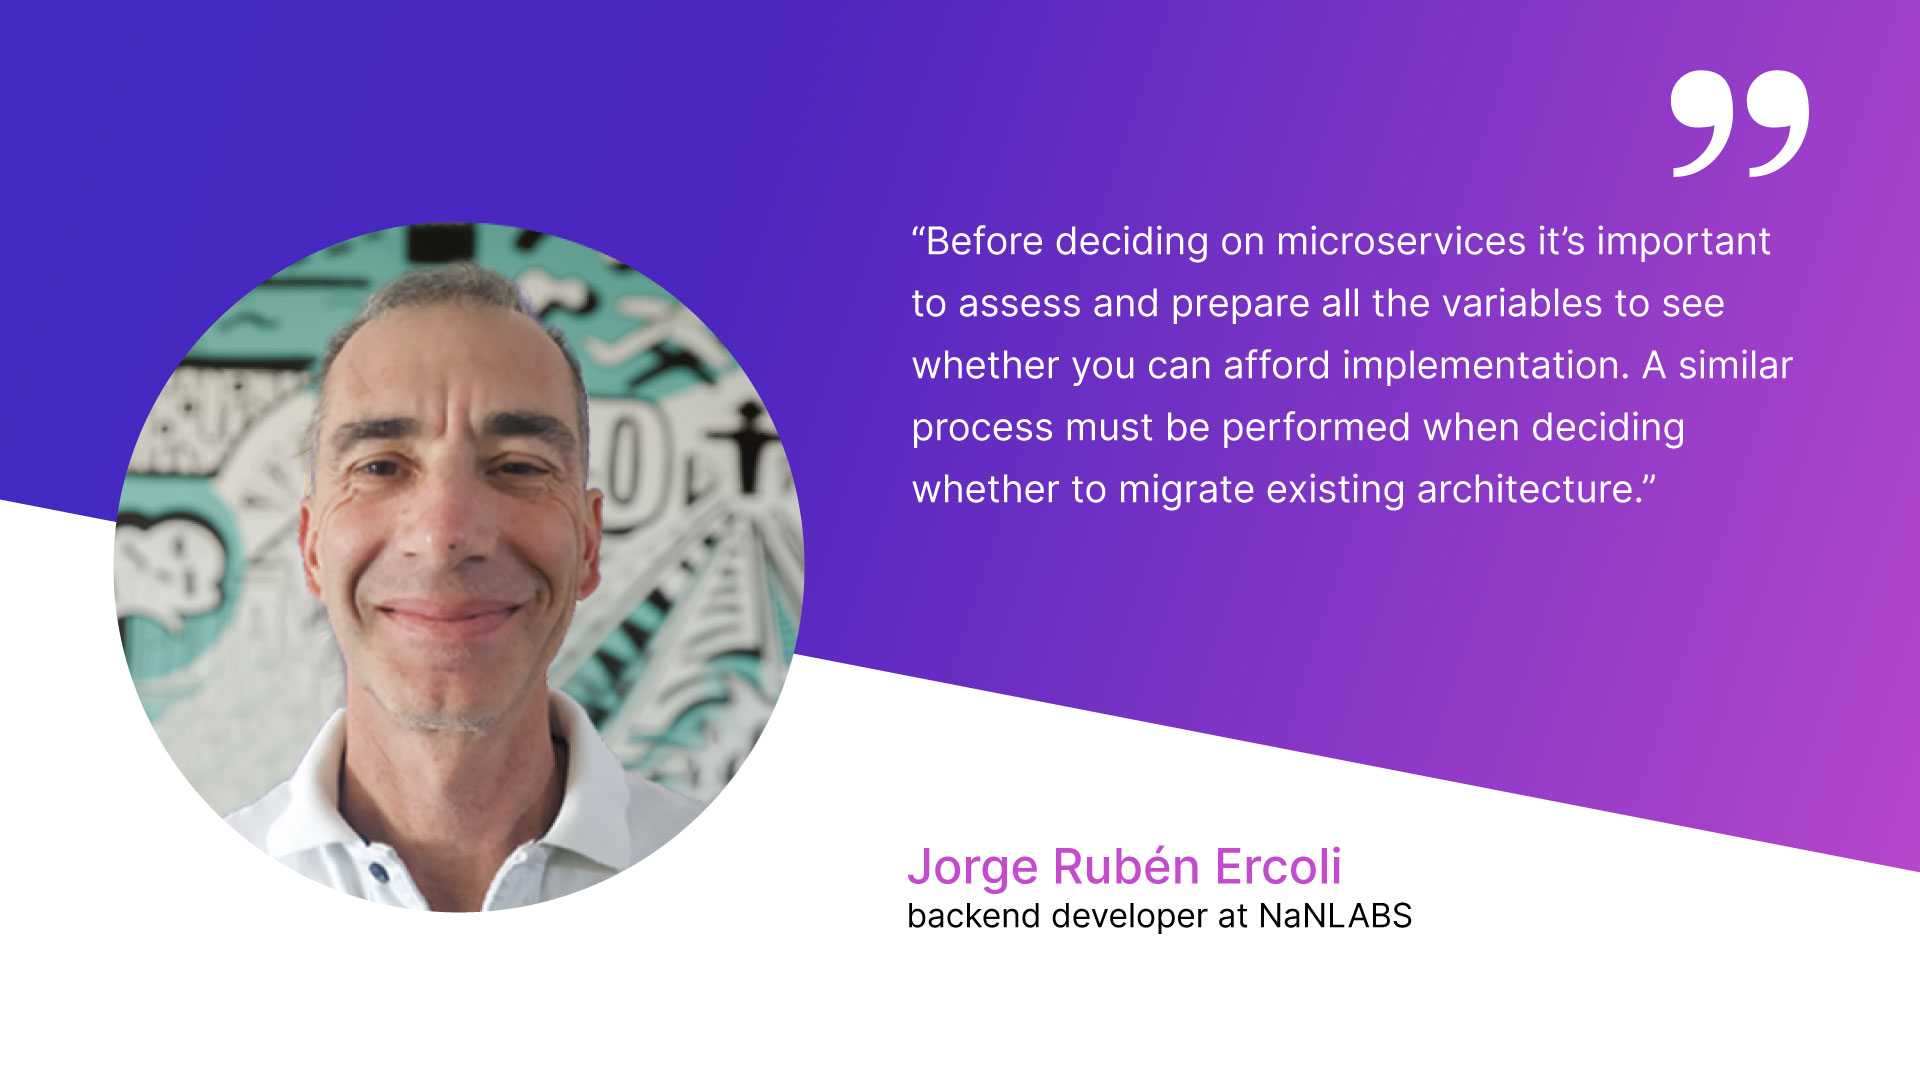 A quote about microservices architecture from Jorge Rubén Ercoli, backend developer at NaNLABS.